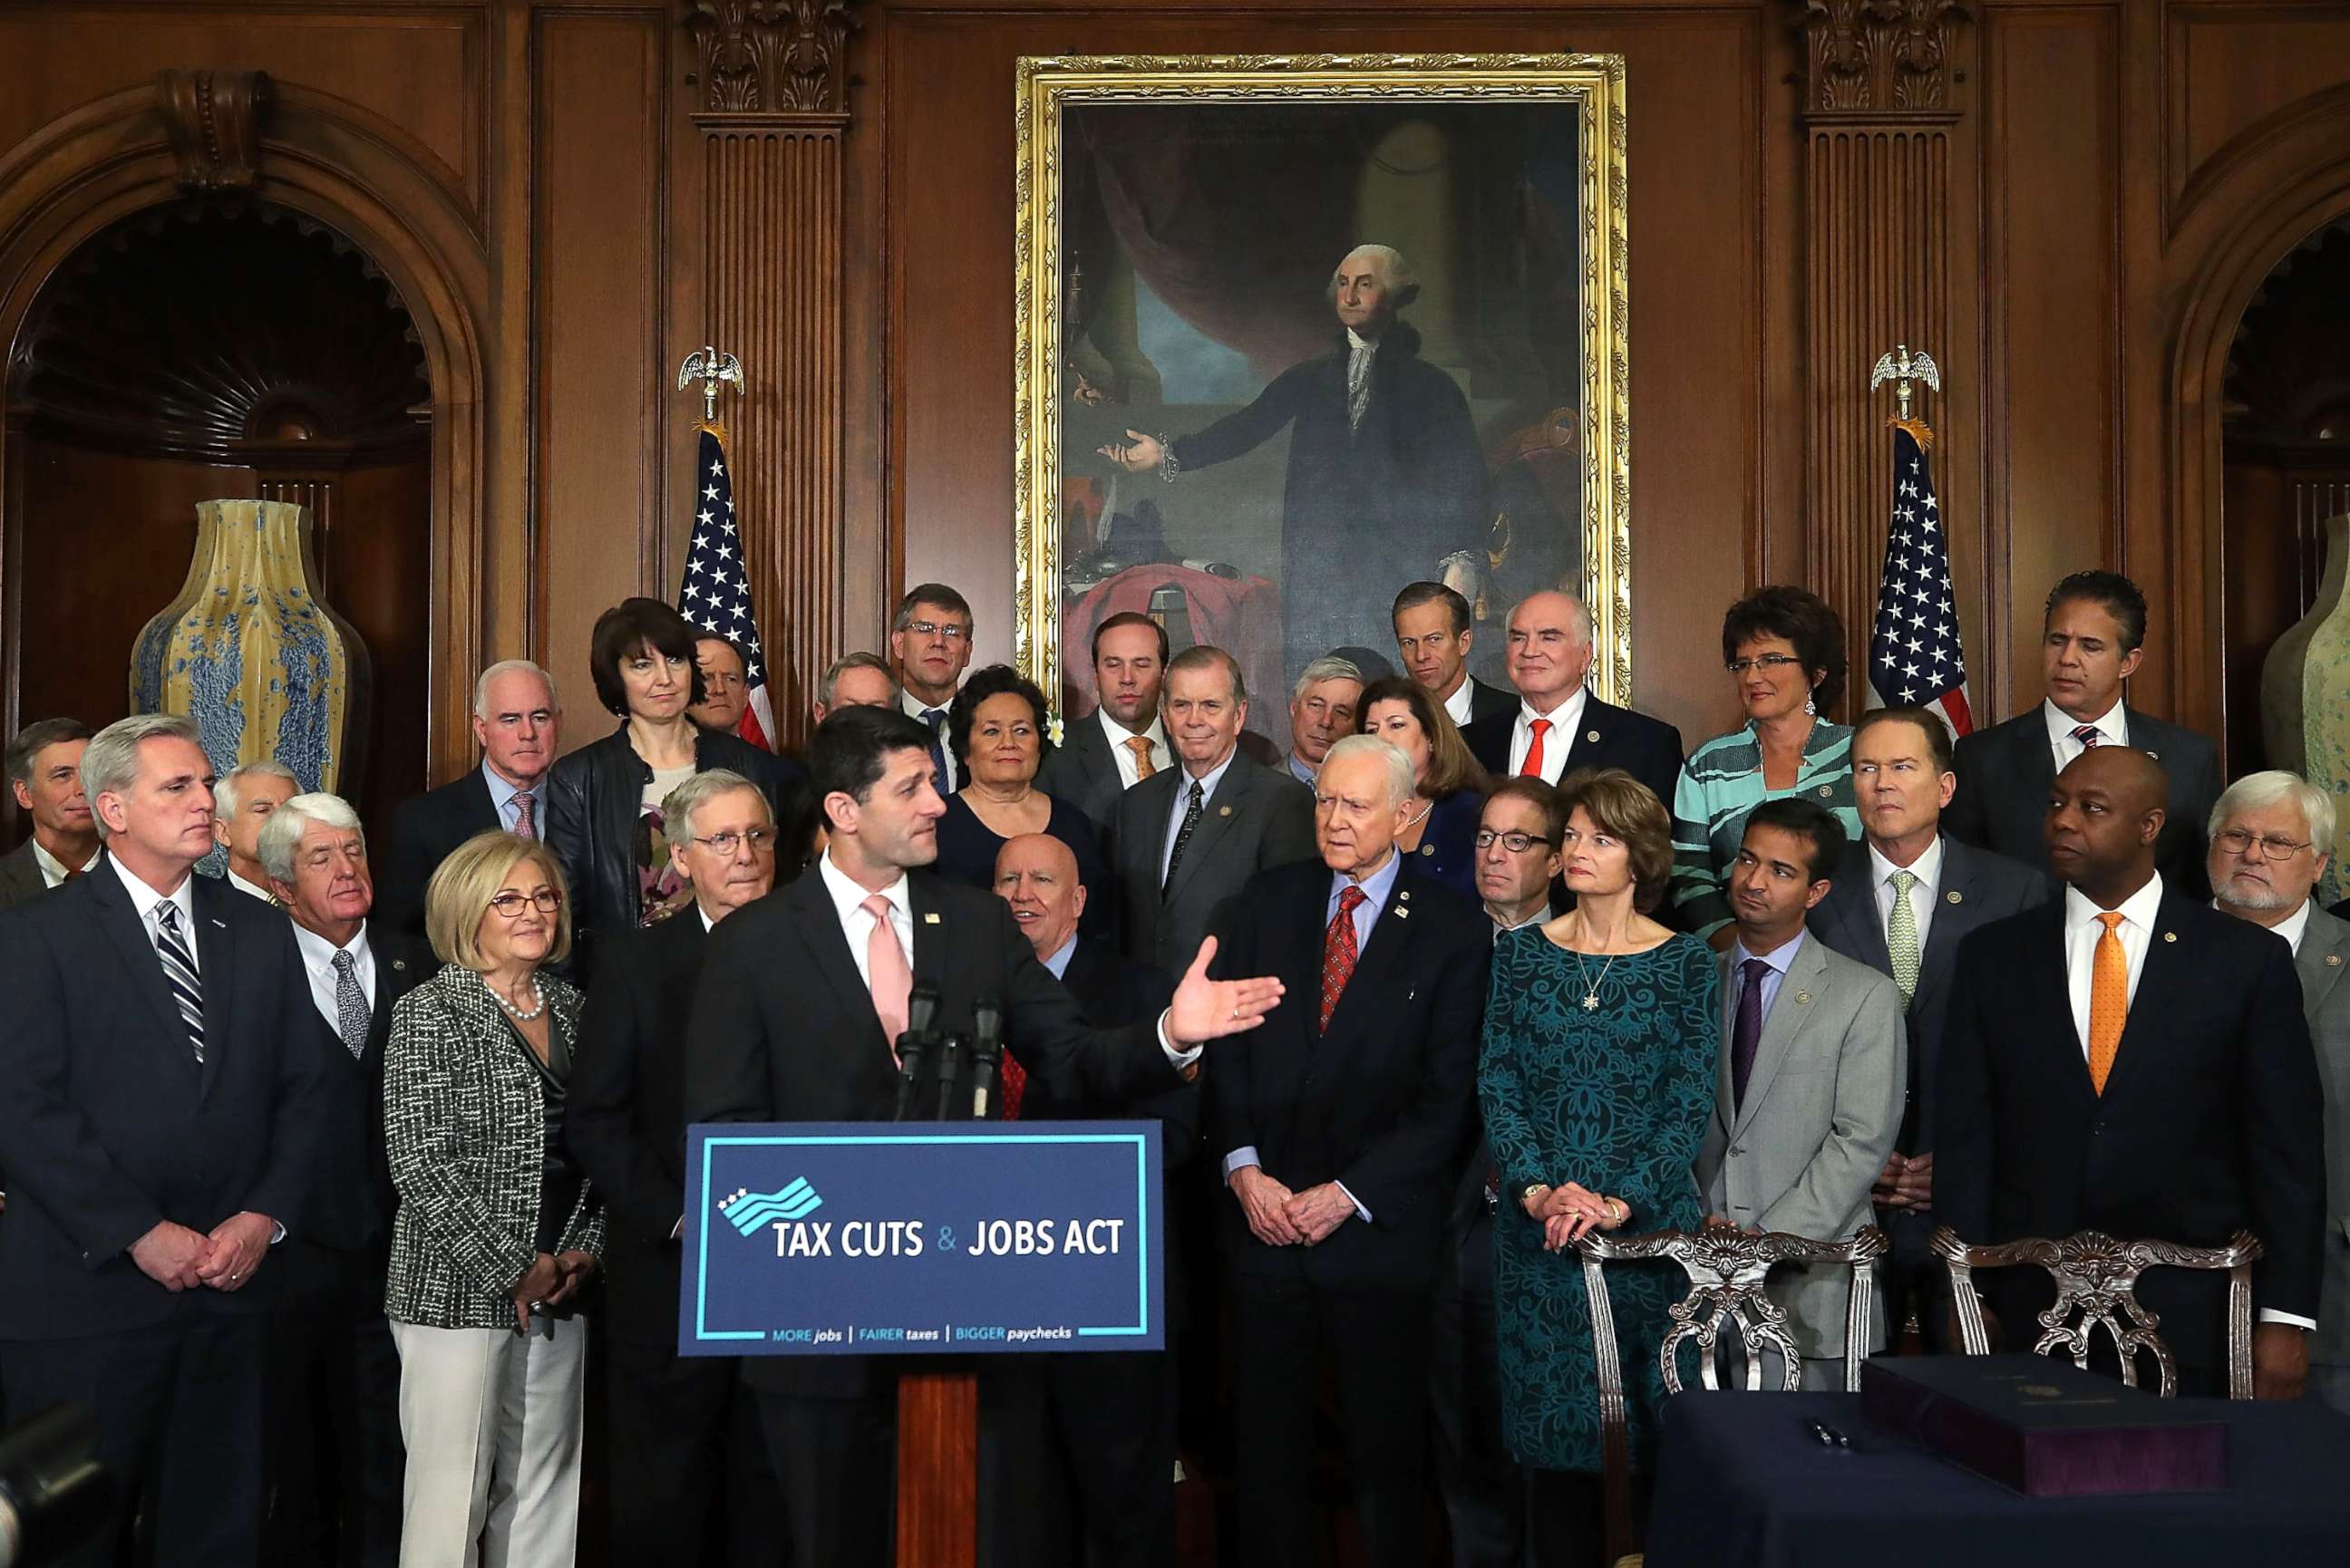 PHOTO: House Speaker Paul Ryan, flanked by Republican lawmakers, speaks during an enrollment ceremony for the conference report to H.R. 1, the Tax Cuts and Jobs Act. that was passed this week by the House and Senate, at the U.S. Capitol, Dec. 21, 2017.